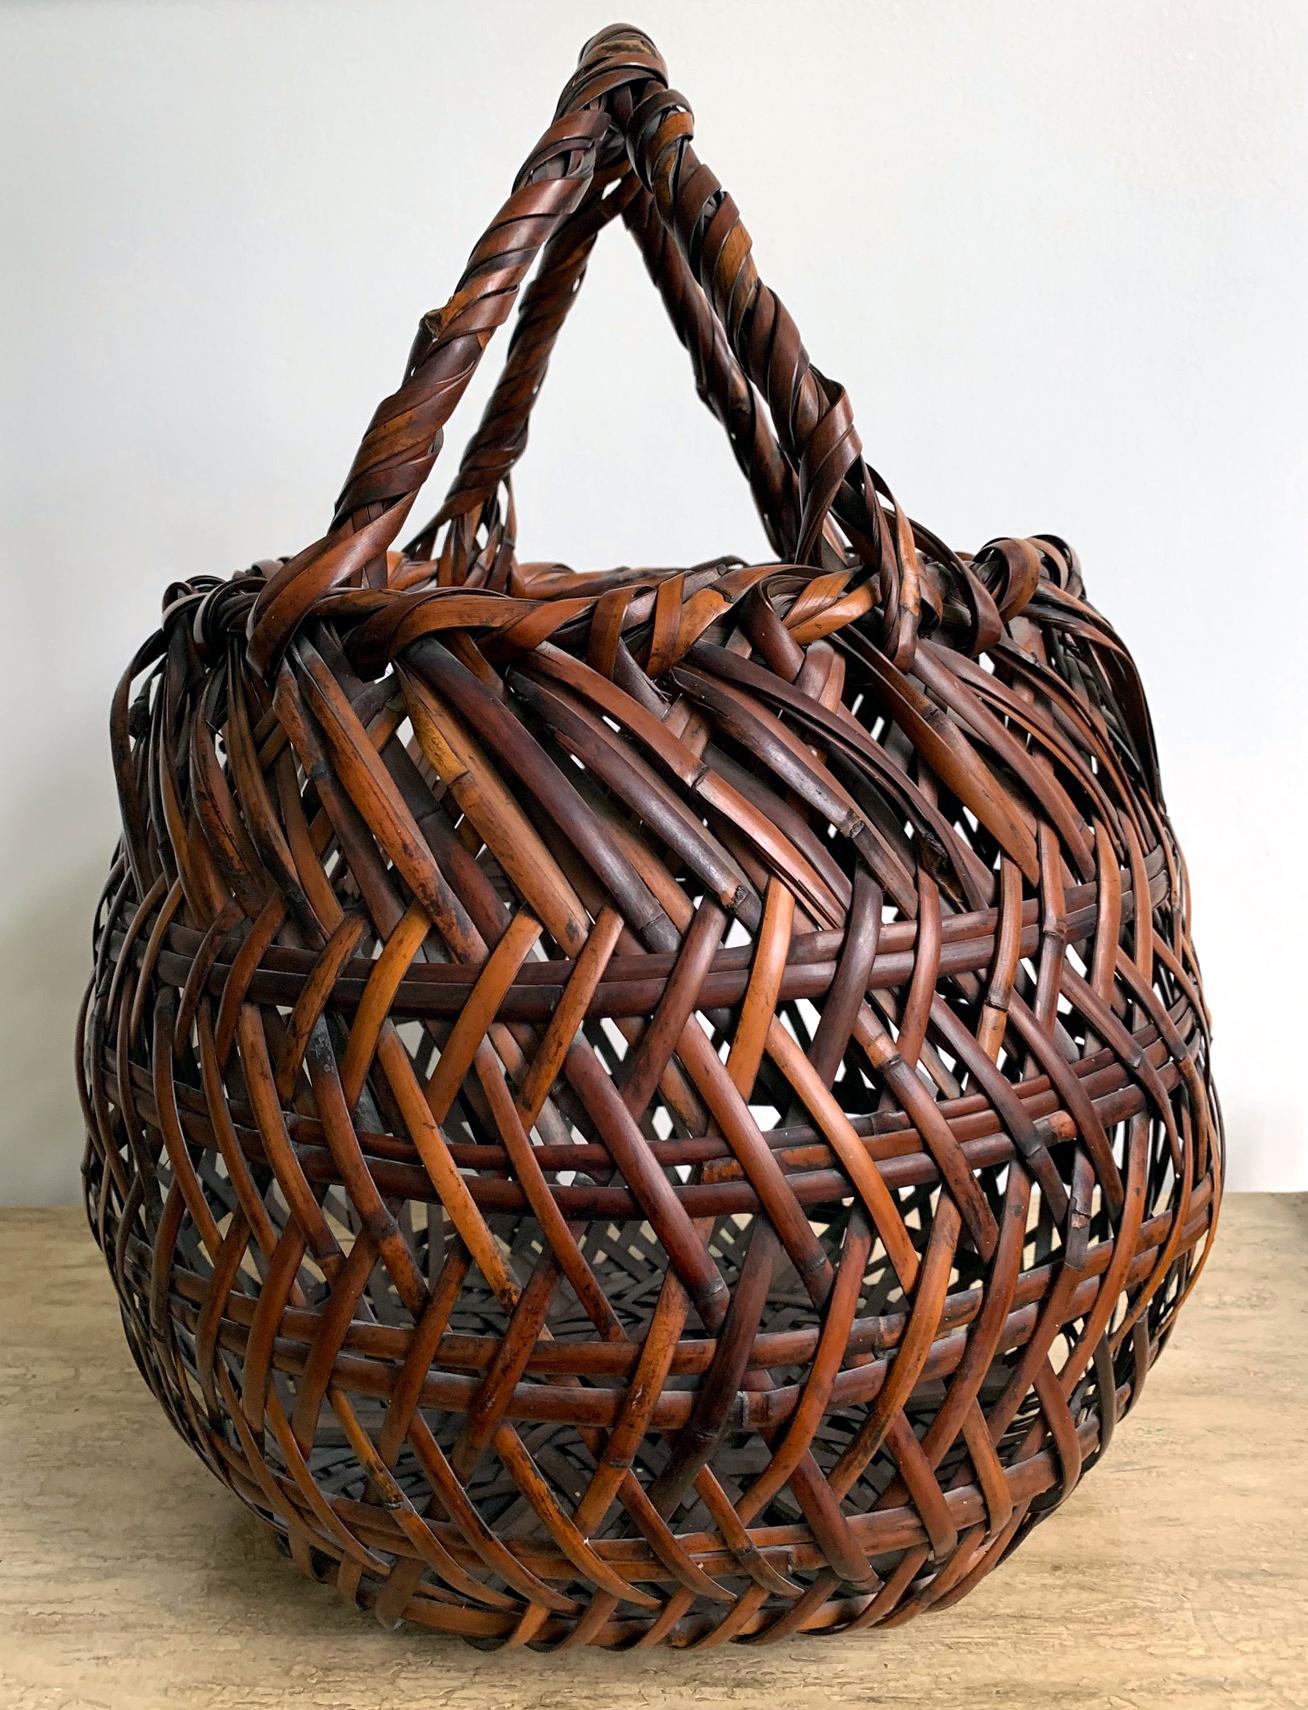 An important Japanese bamboo Ikebana basket by Yamamoto Chikuryosai I (also known as Chikuryusai I, Shoen after 1929) (1868-1945). Active in Osaka, Kansai region, he was advised by Wada Waichisai I. After 1929, he signed his work as Shoen (Shoen